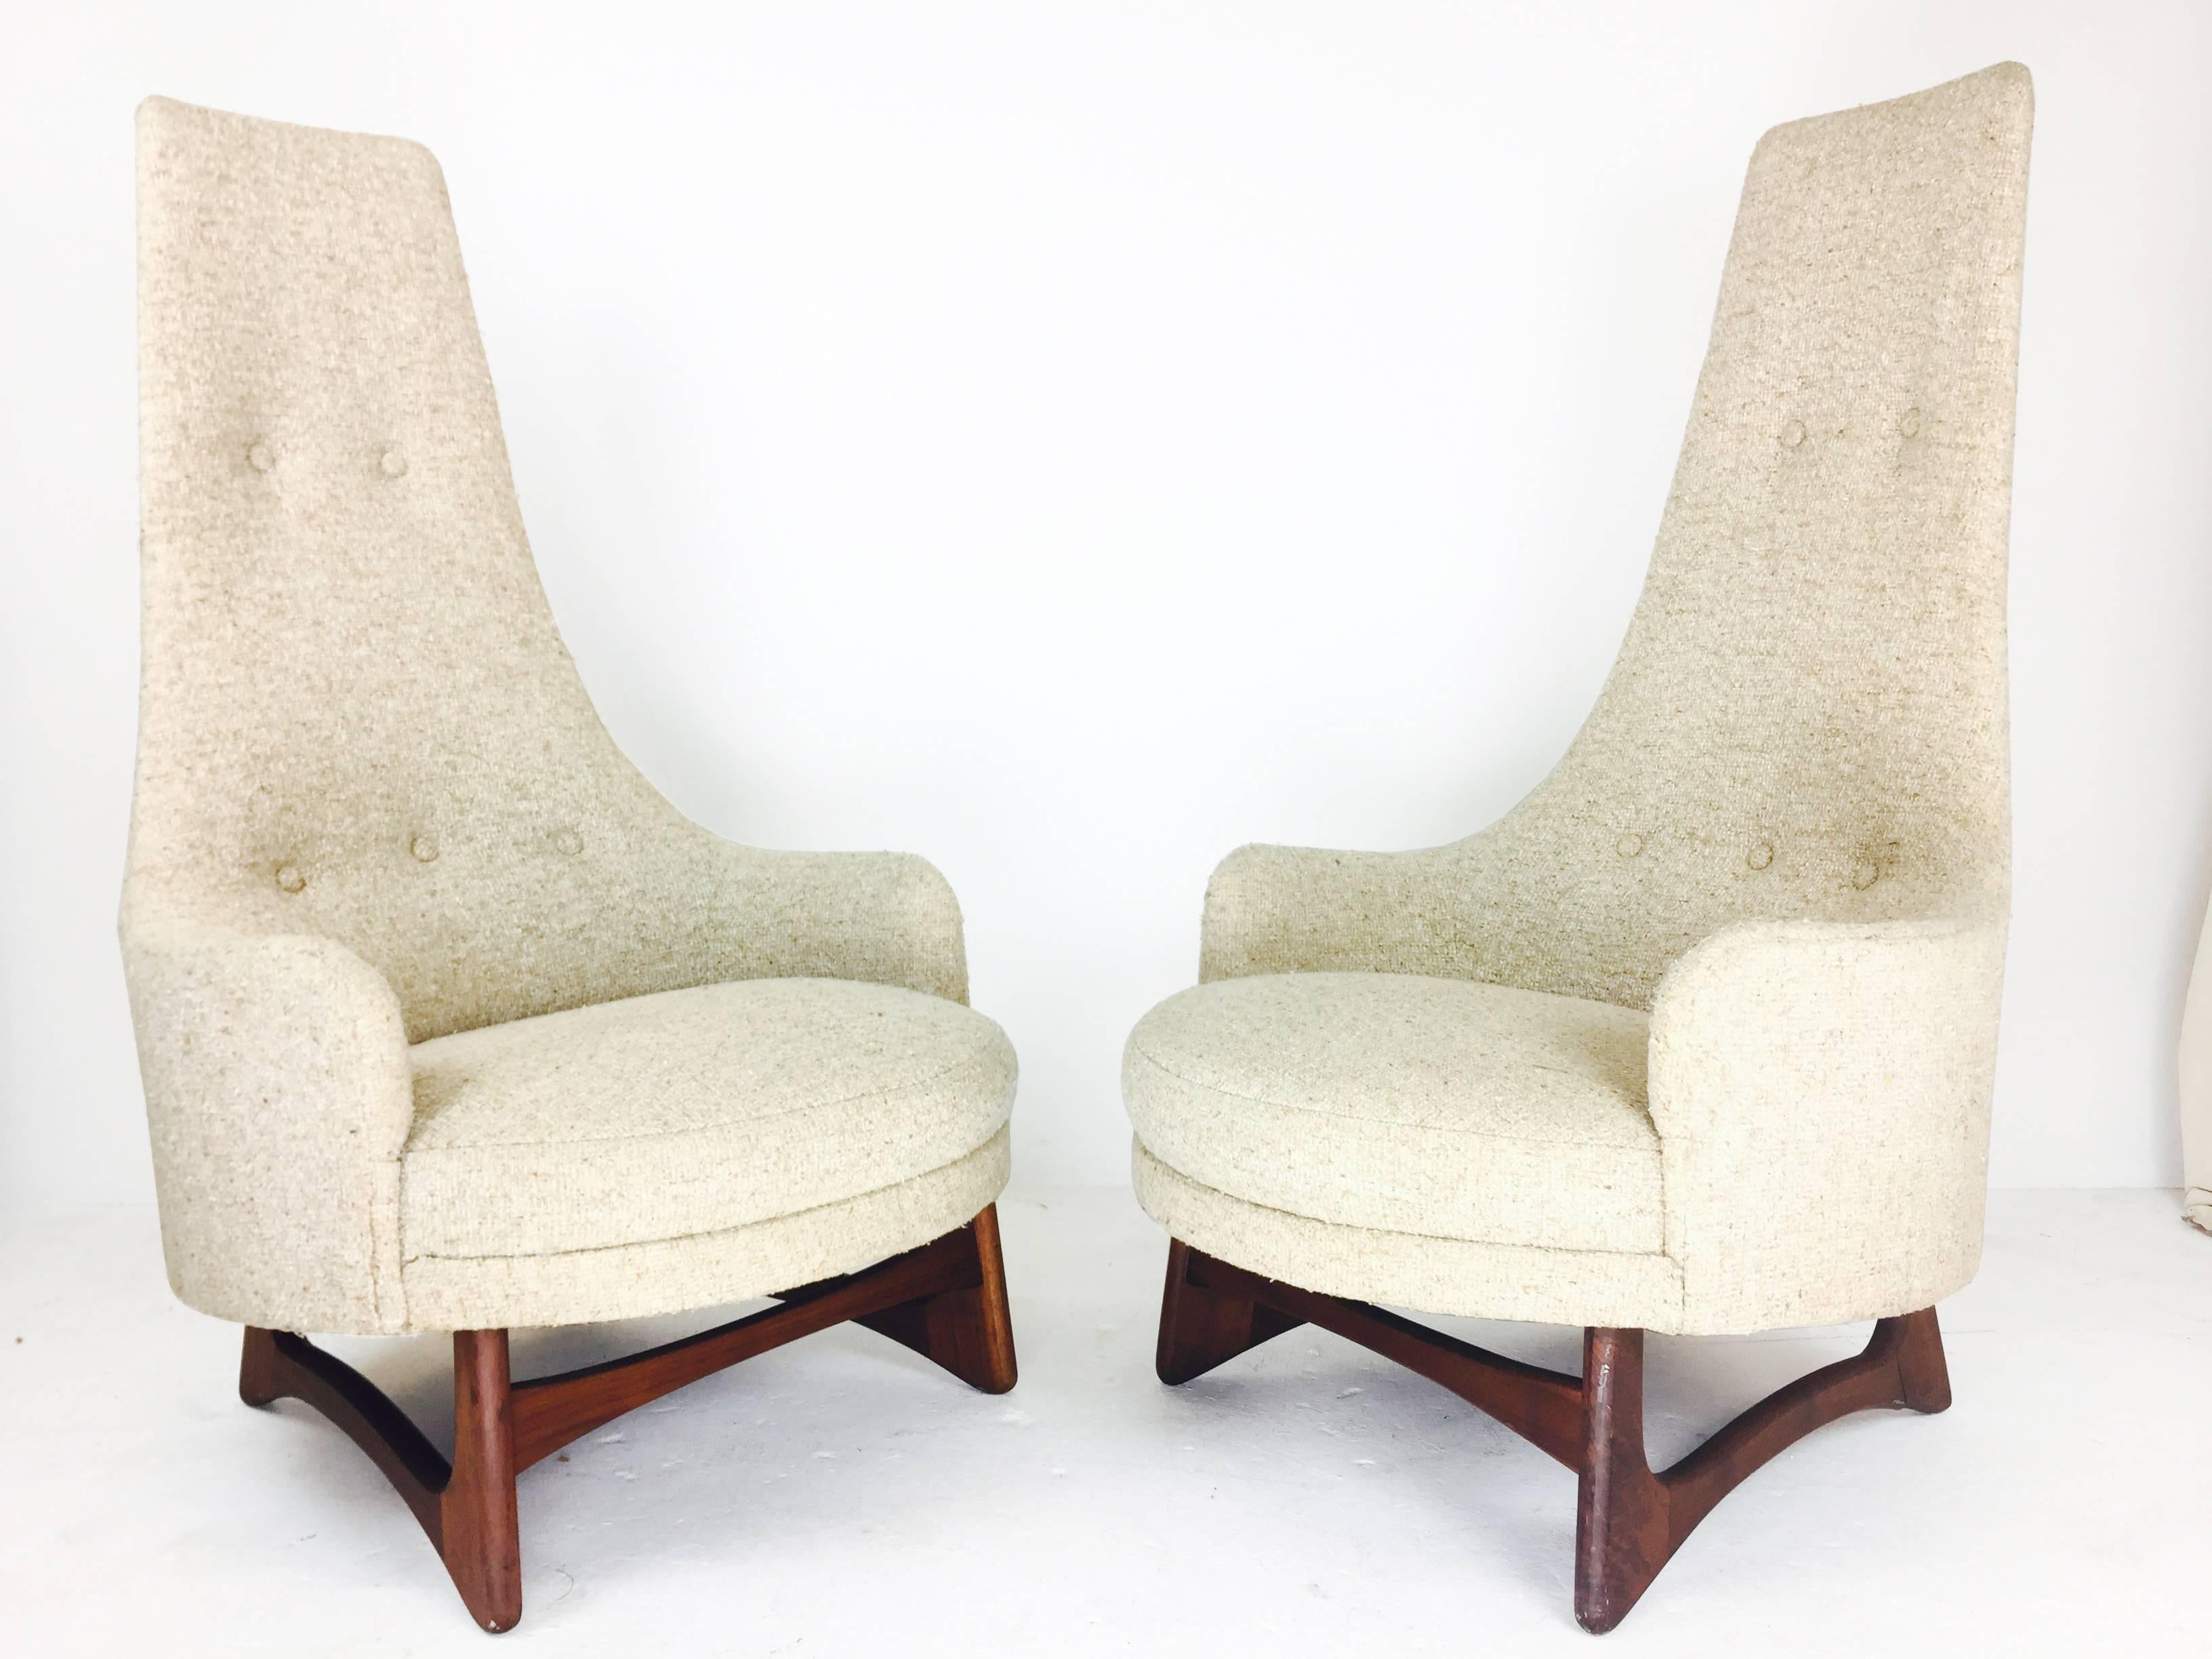 Pair of tall back Adrian Pearsall armchairs. The original textured upholstery is in good vintage condition and the legs need a little tlc, circa 1960s.

Dimensions: 31" W x 36" D x 54" T,
seat height 19.
 